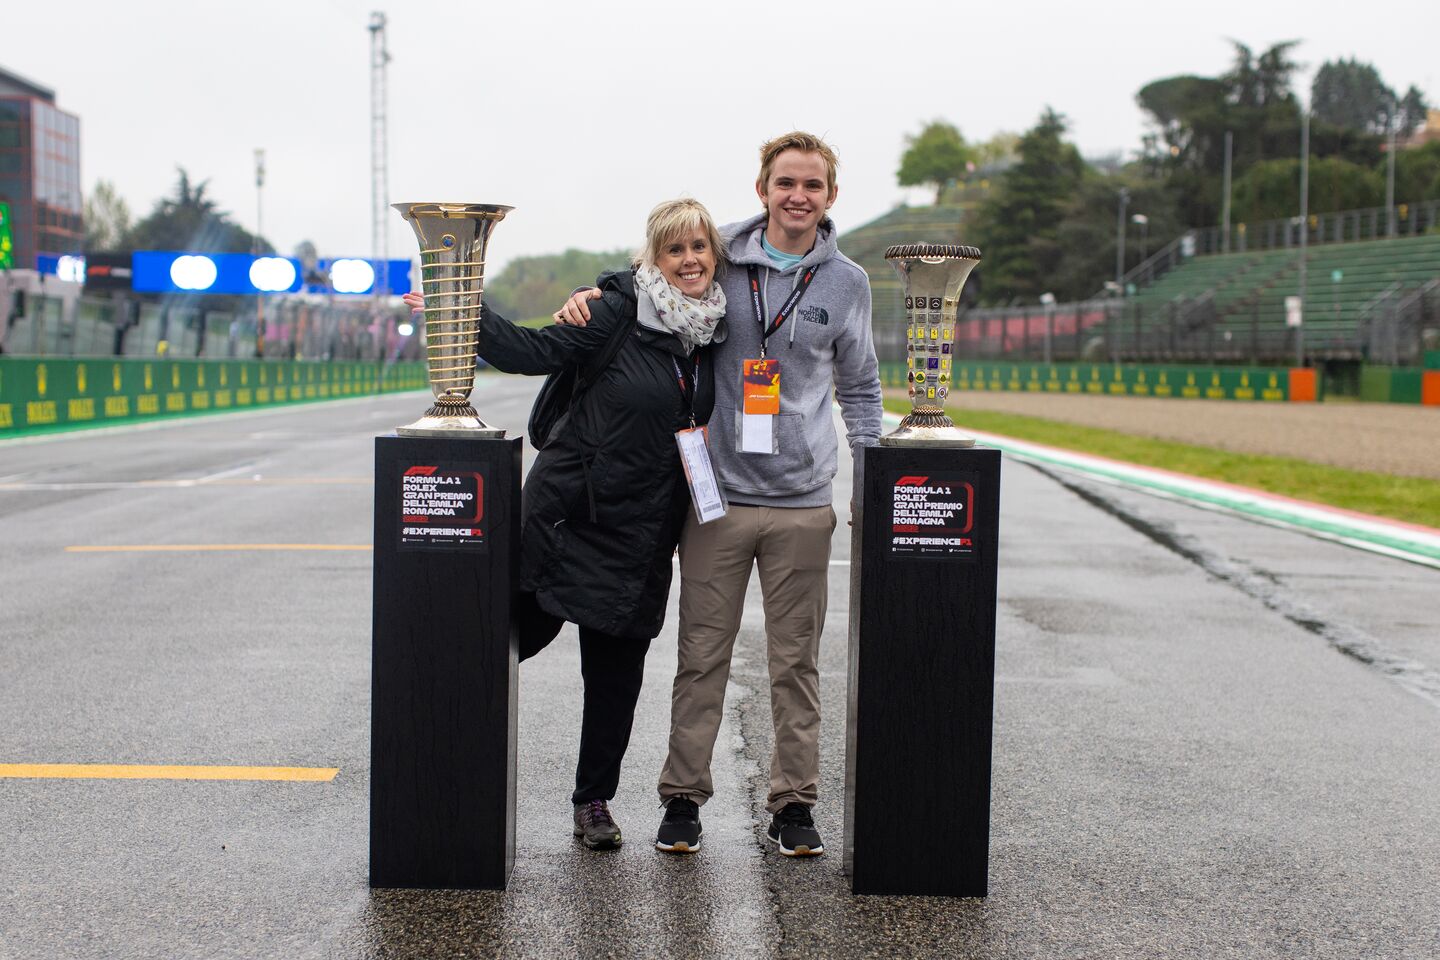 Imola fans with trophy